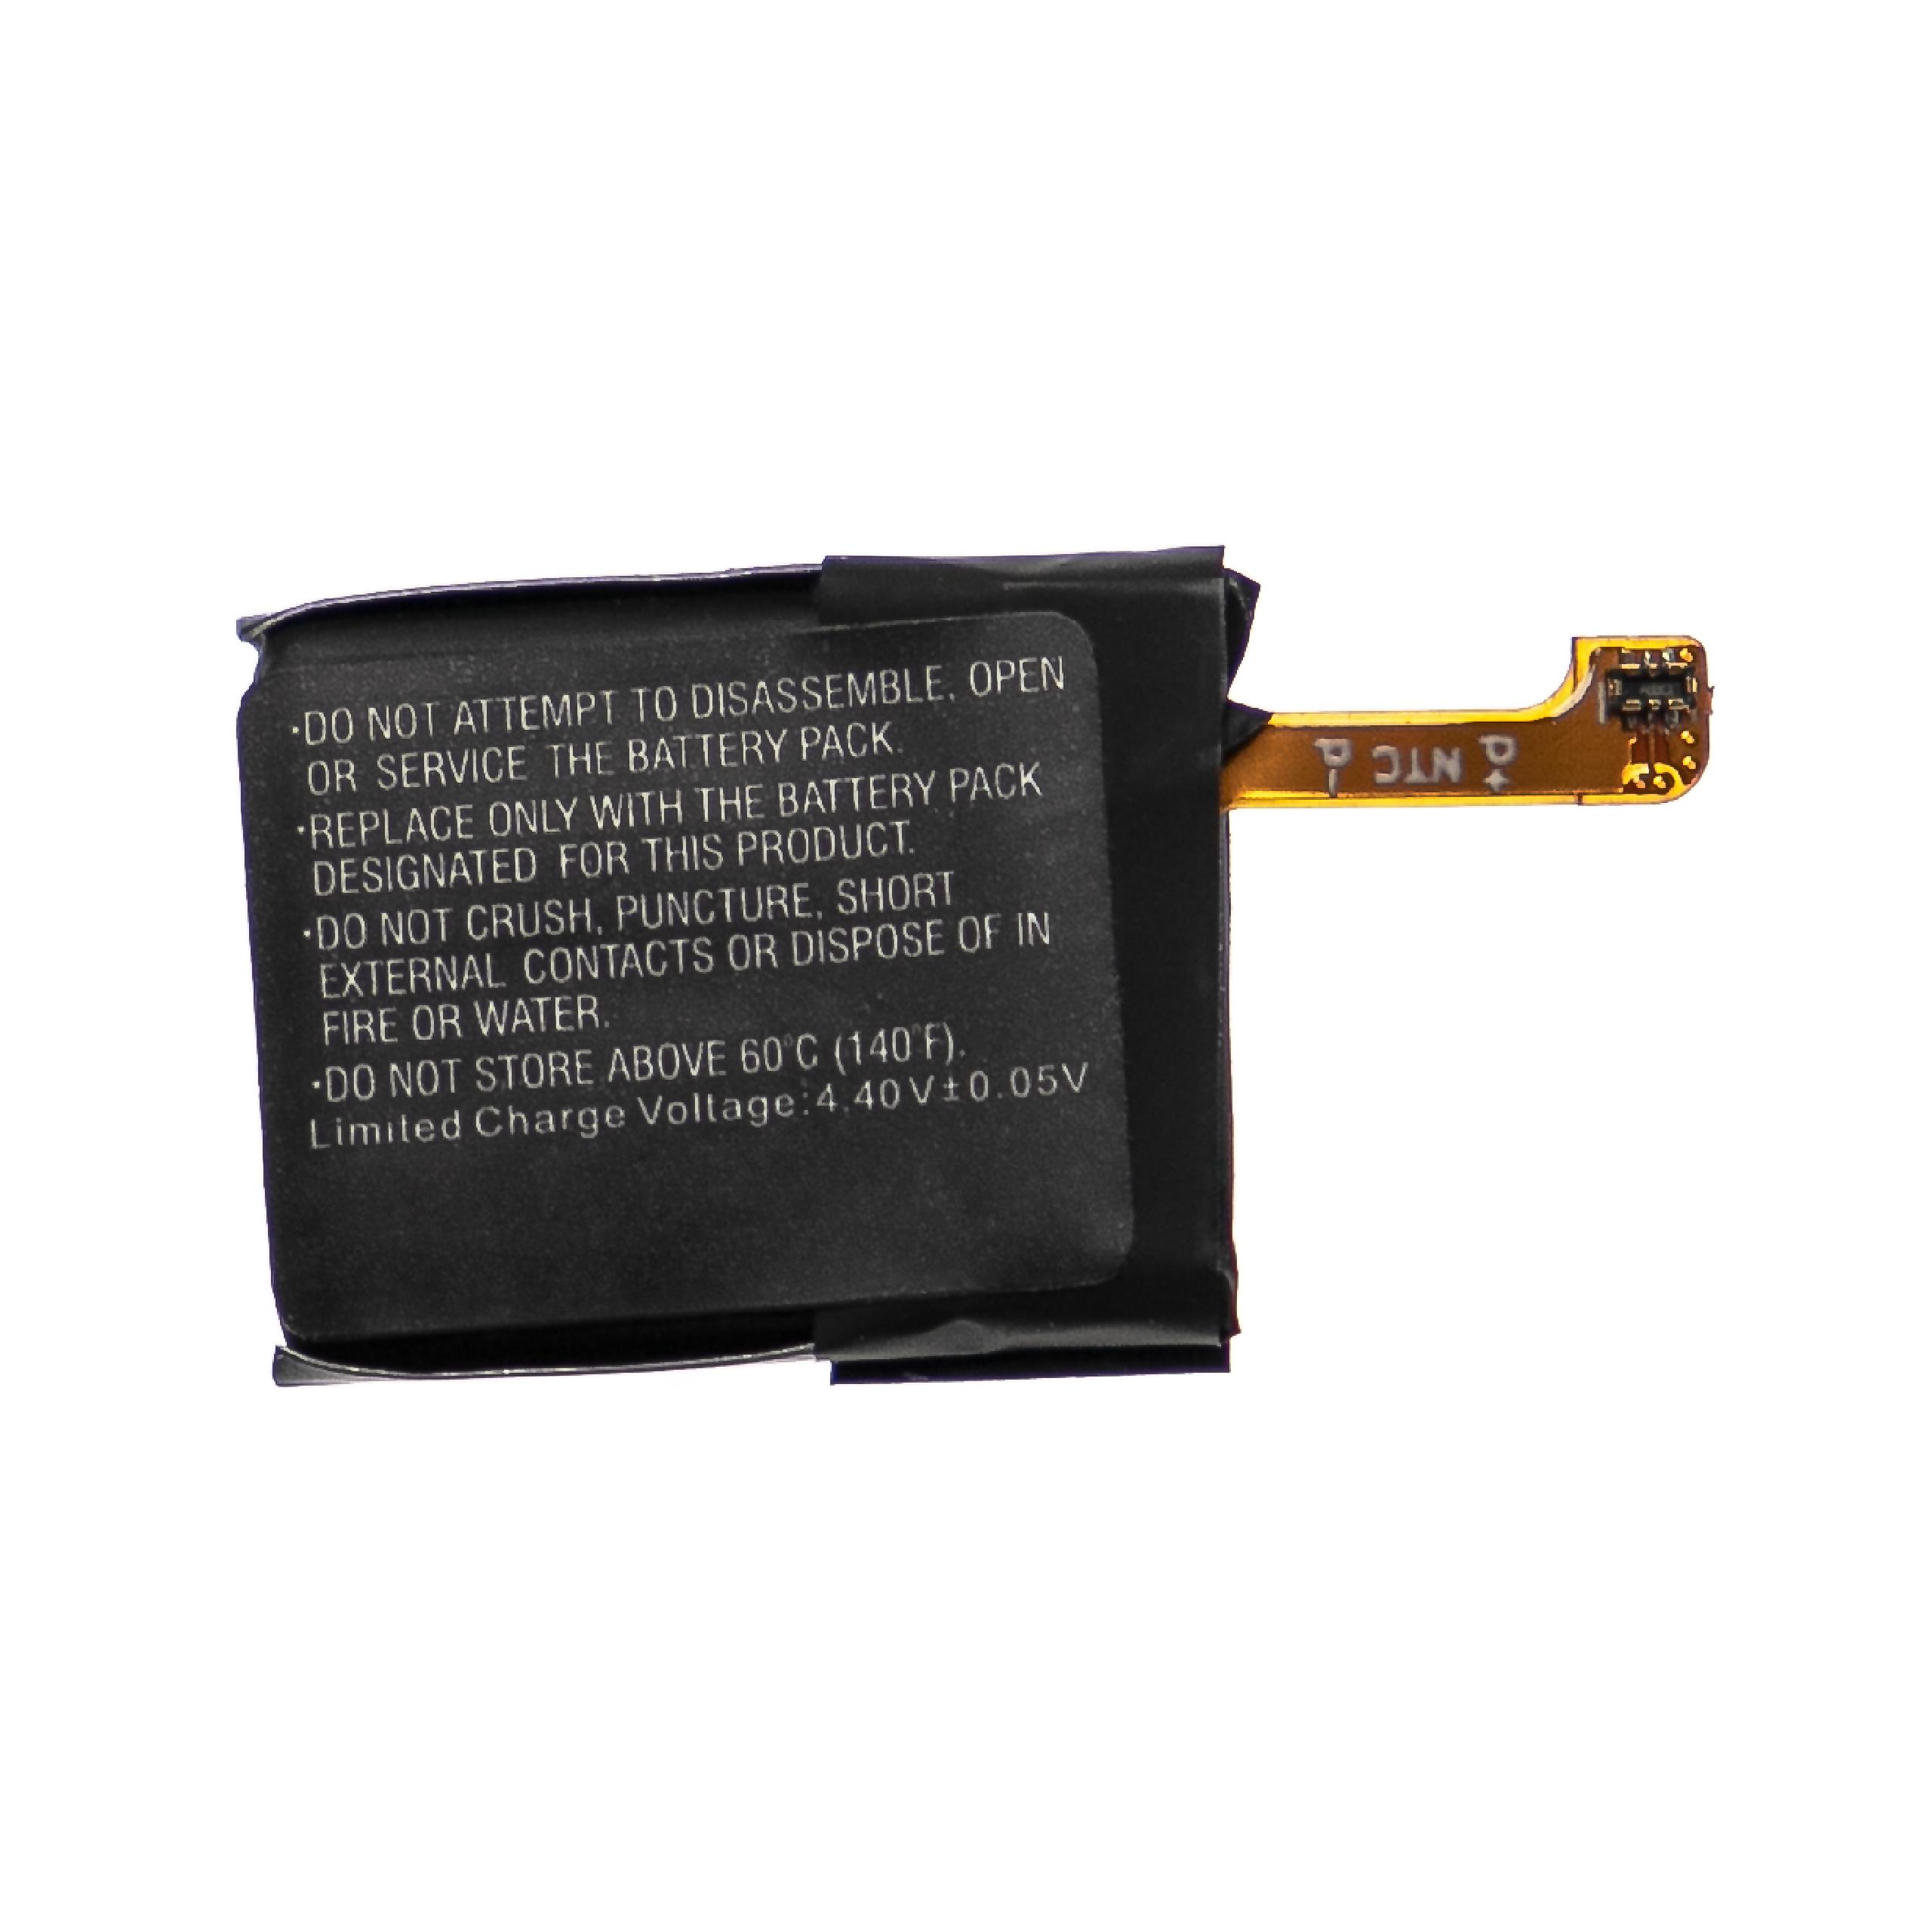 Smartwatch Battery Replacement for Fitbit LSS271621 - 70mAh 3.85V Li-polymer